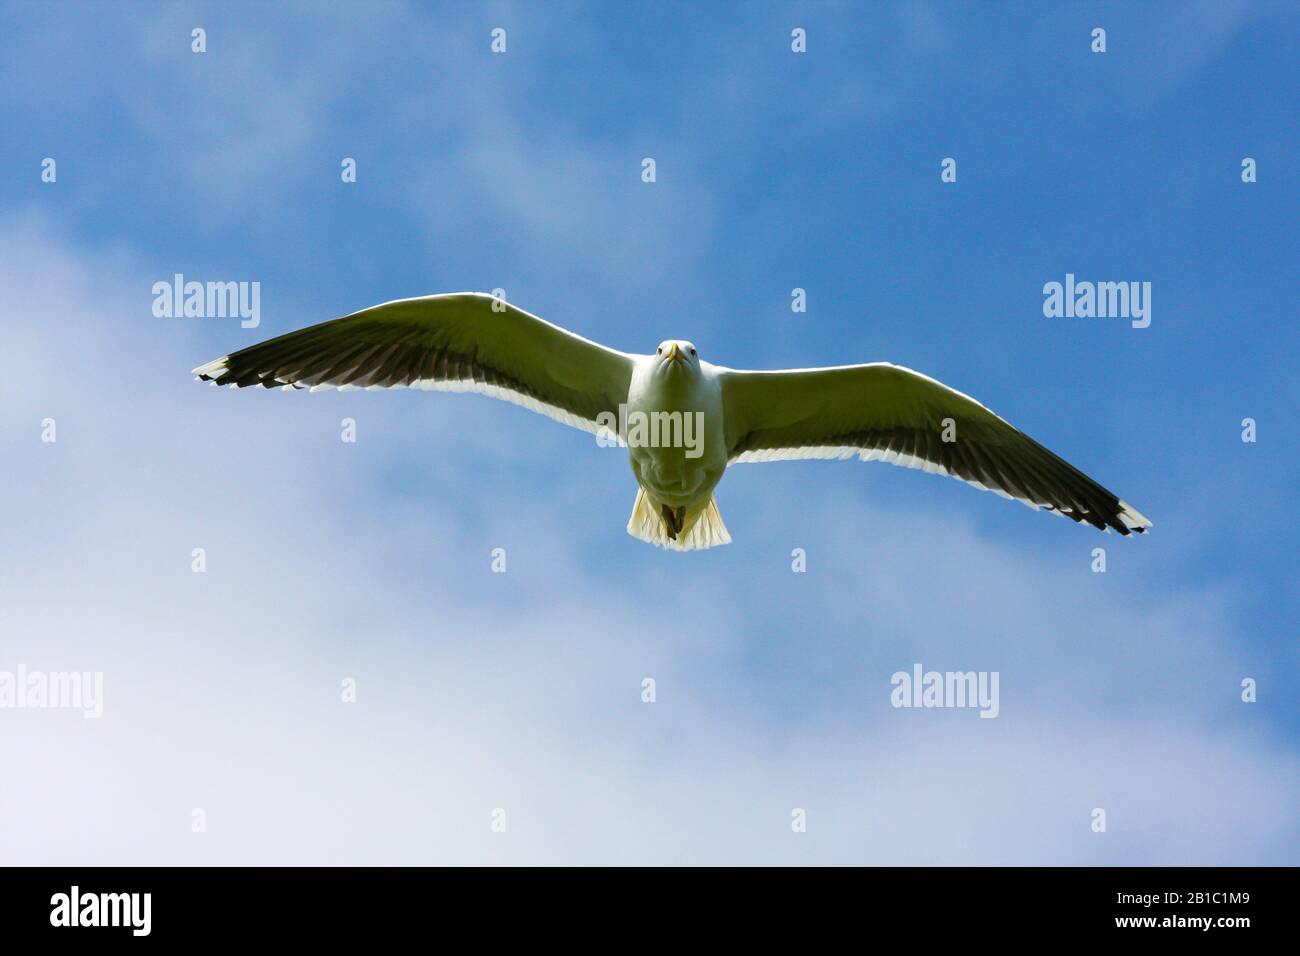 Great black-backed gull (Larus marinus) in flight against blue sky background. Wings outstretched and head looking left searching. Ireland. Underside Stock Photo